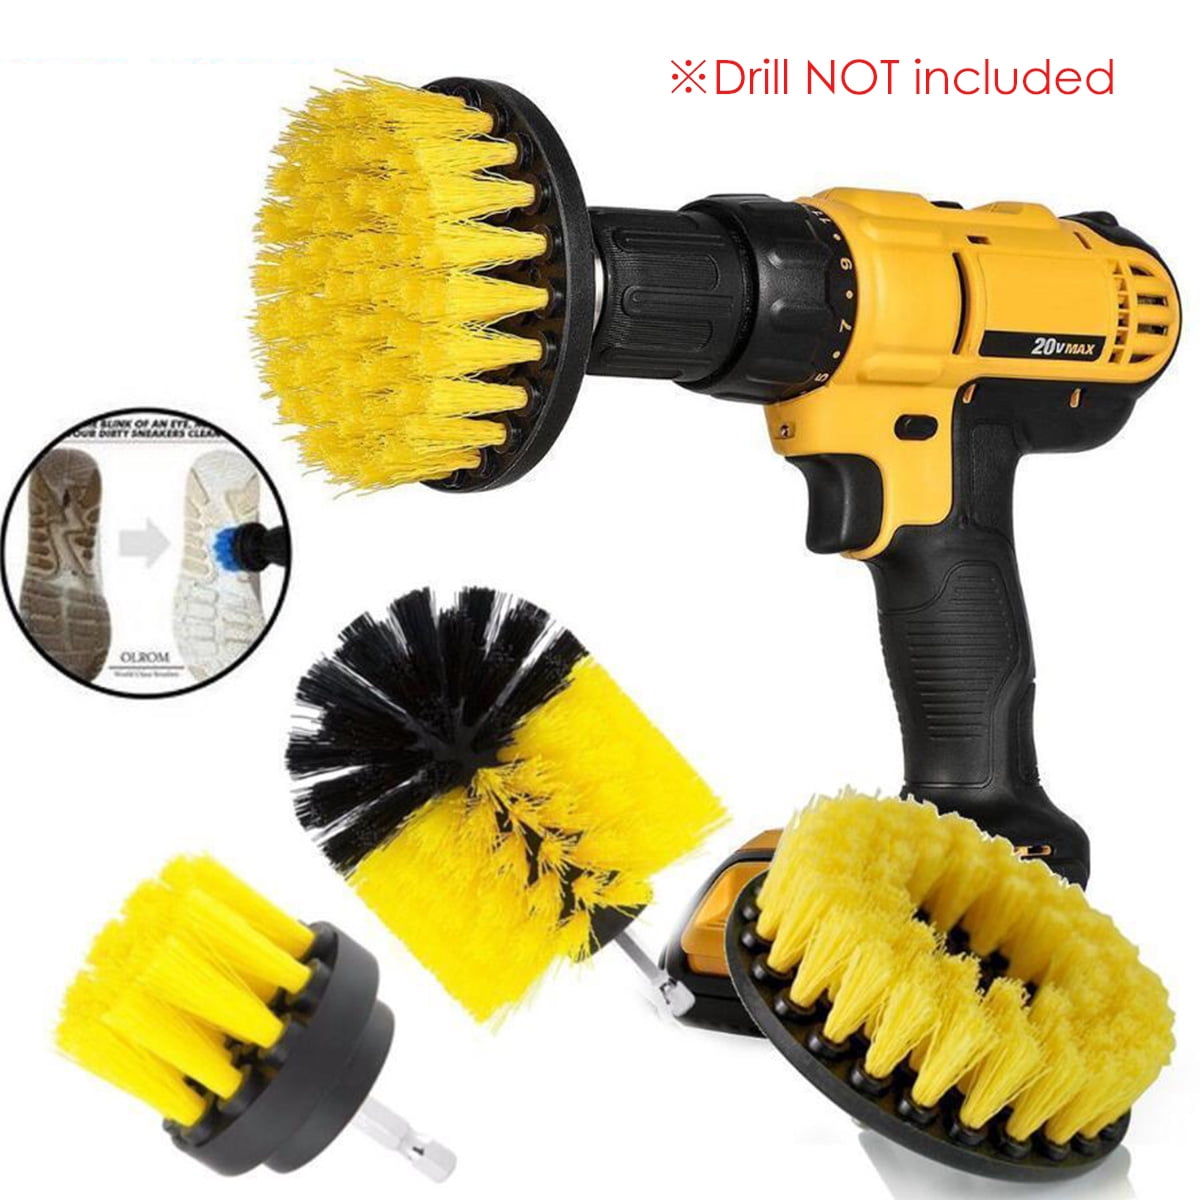 3Pcs/Set Tile Grout Power Scrubber Cleaning Drill Brush Tub S Combo Cleaner R5L6 